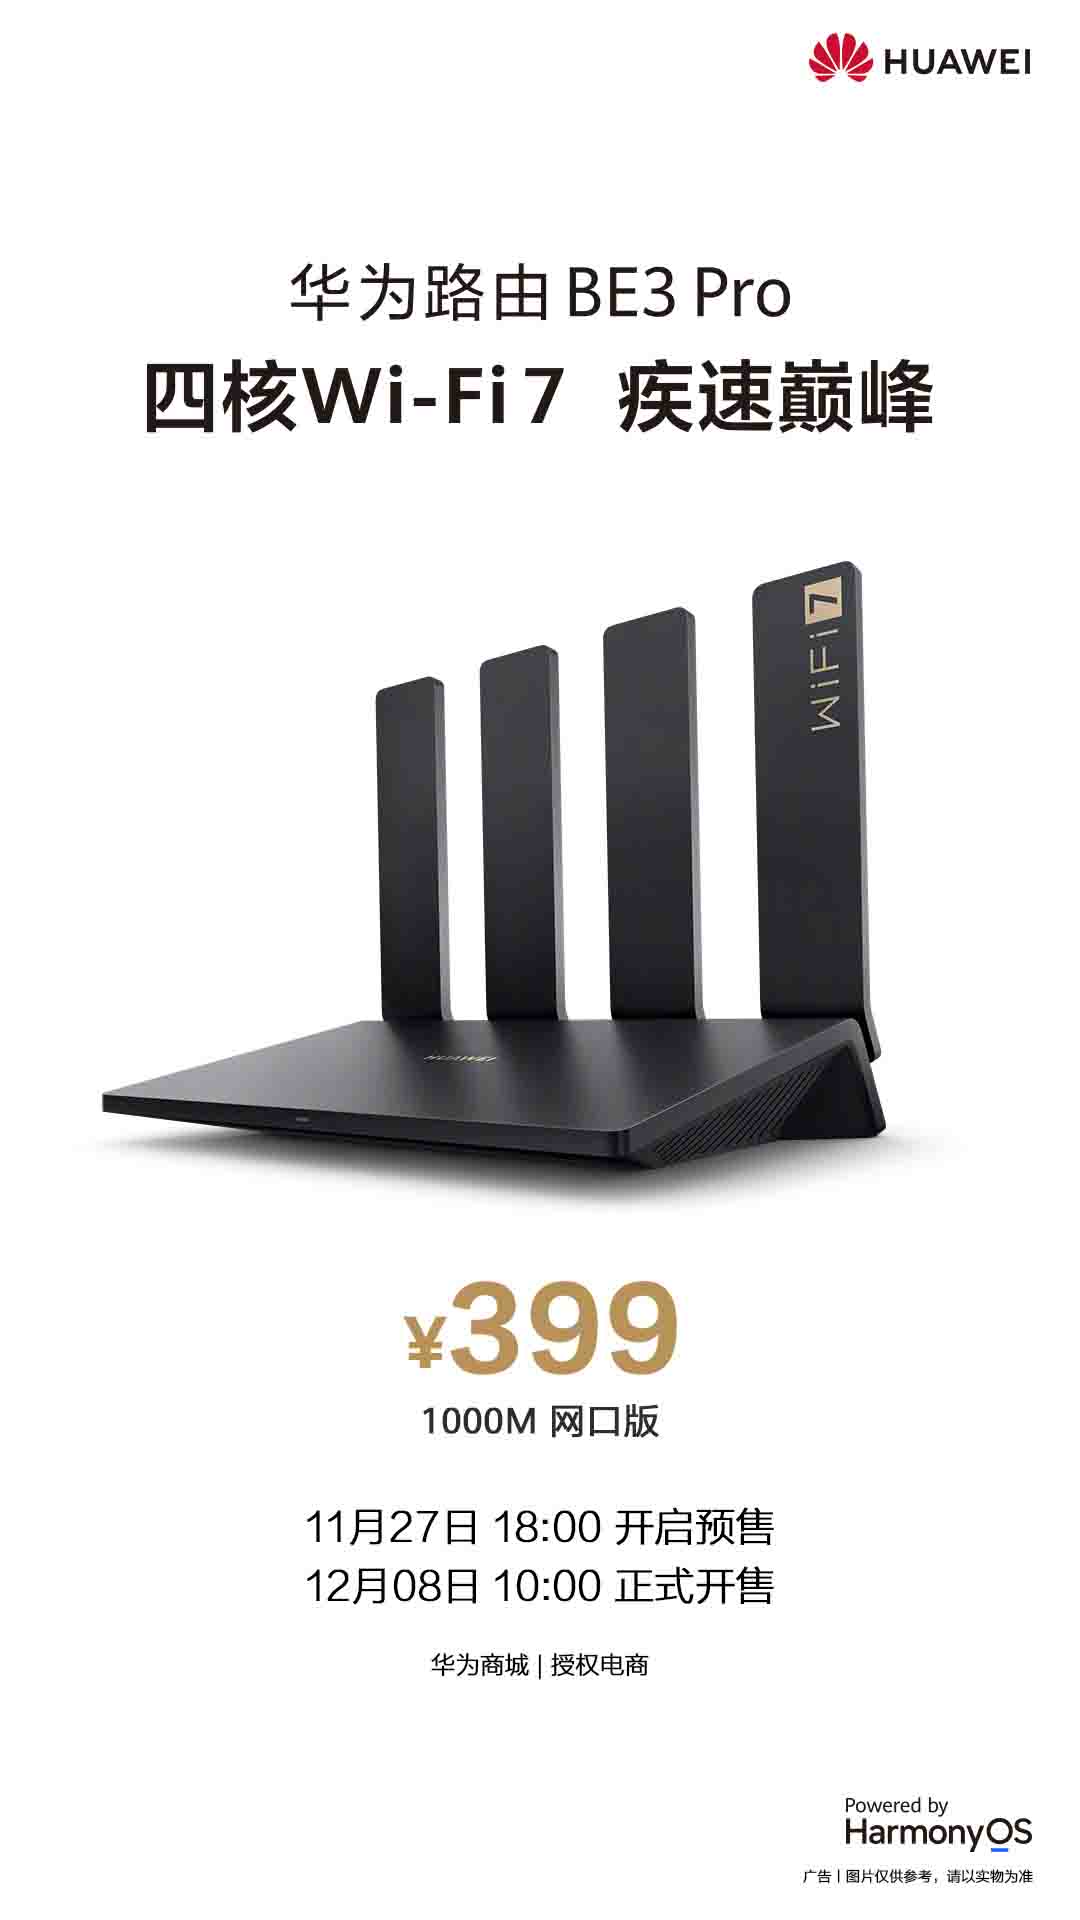 Huawei's Wi-Fi 7 router pre-sale